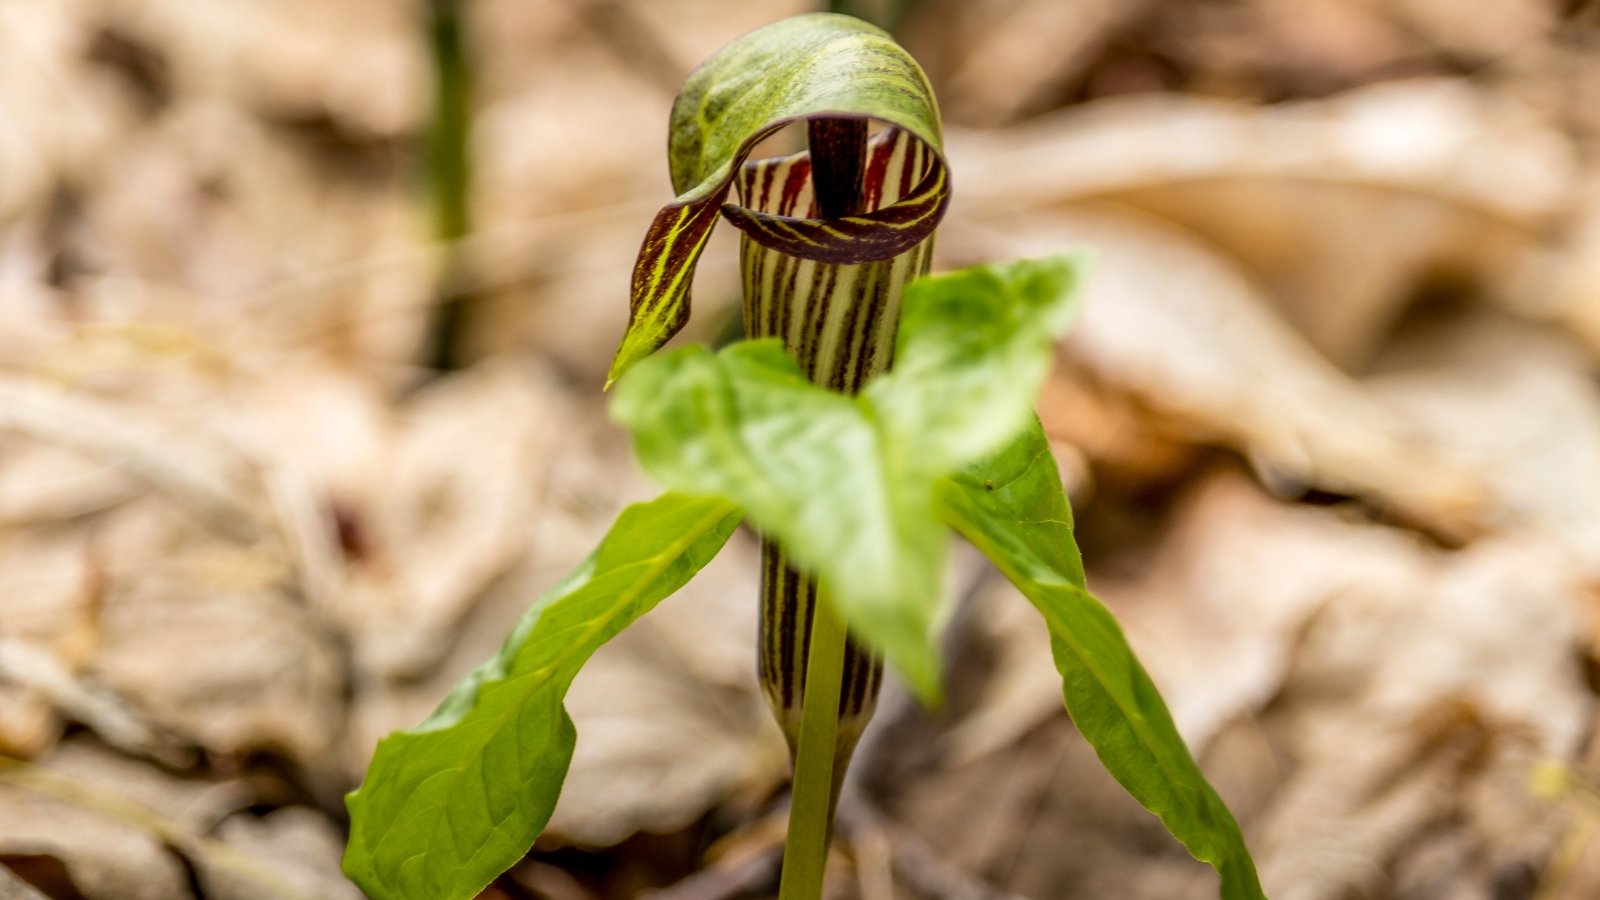 The jack-in-the-pulpit features a unique flower with a striped, hooded spathe enveloping a slender spadix, accompanied by three-parted, glossy green leaves.